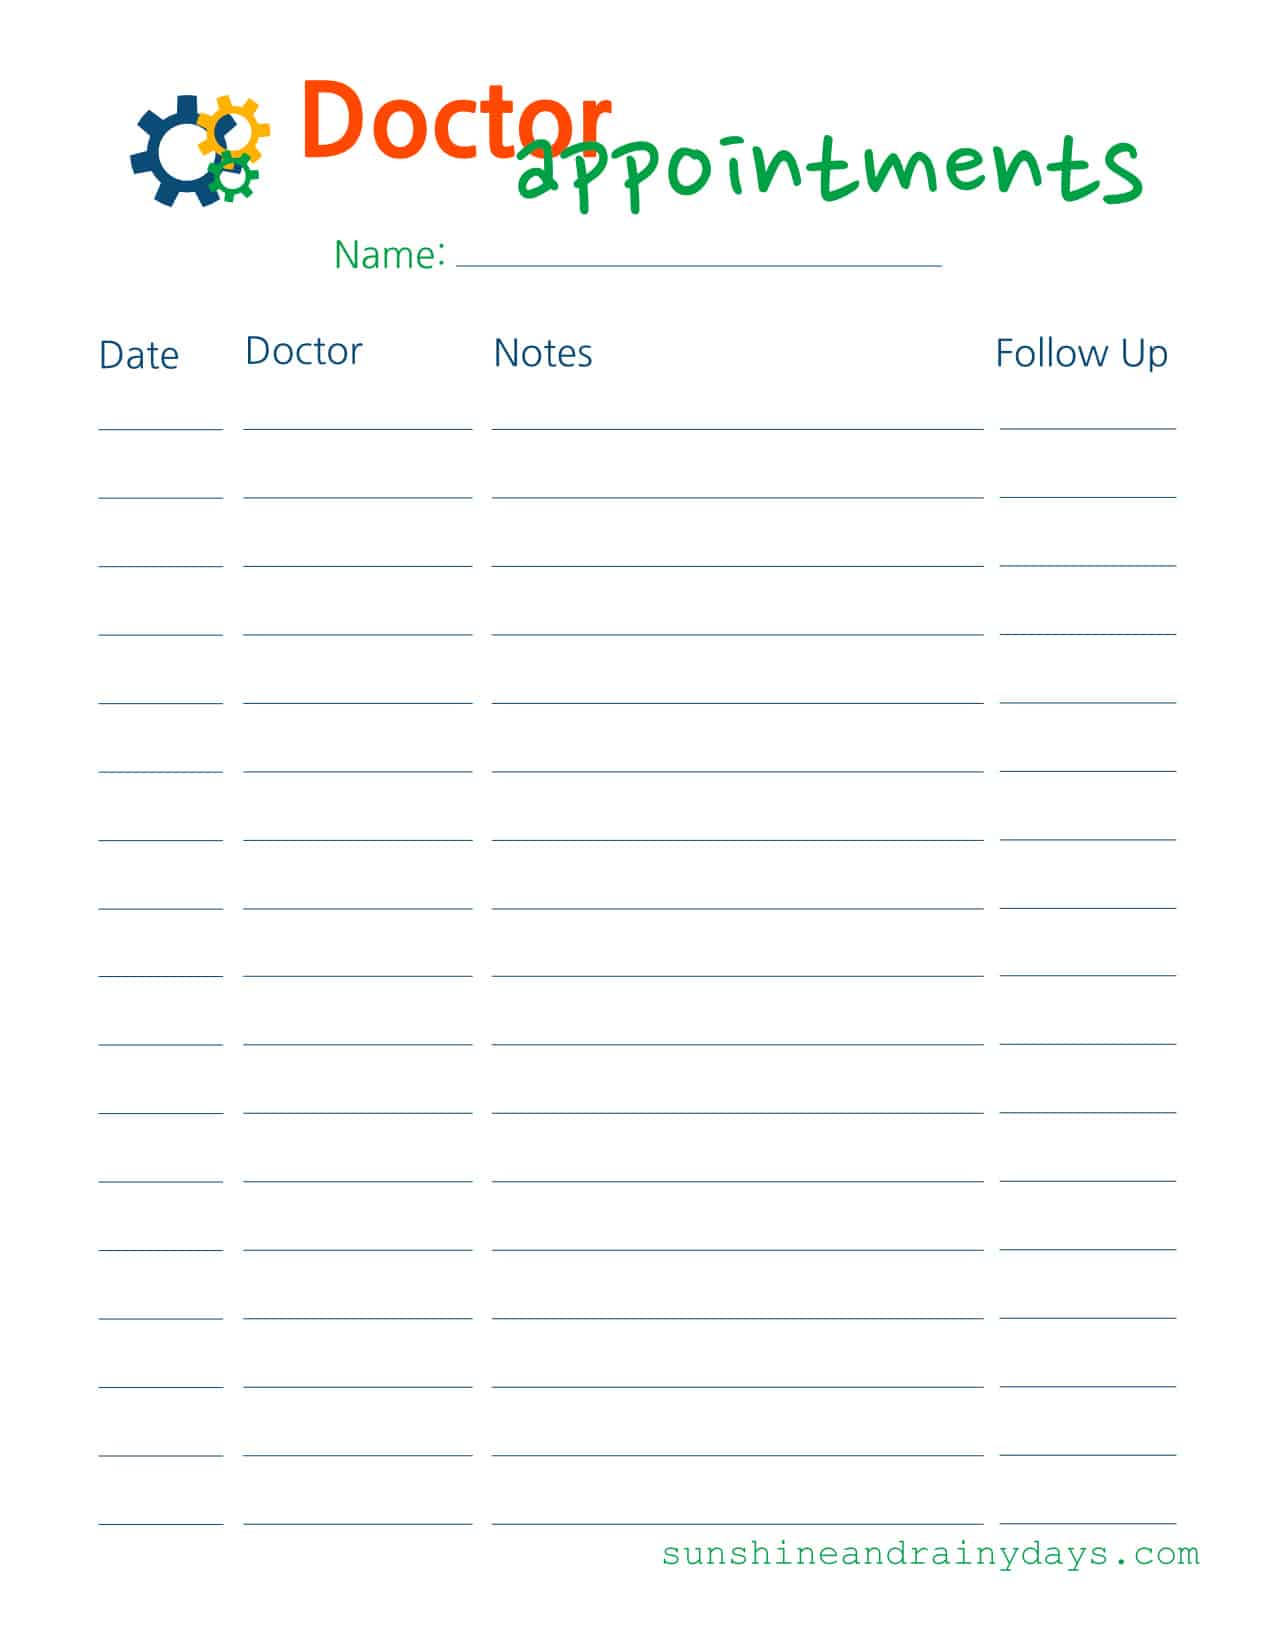 printable-doctor-appointment-log